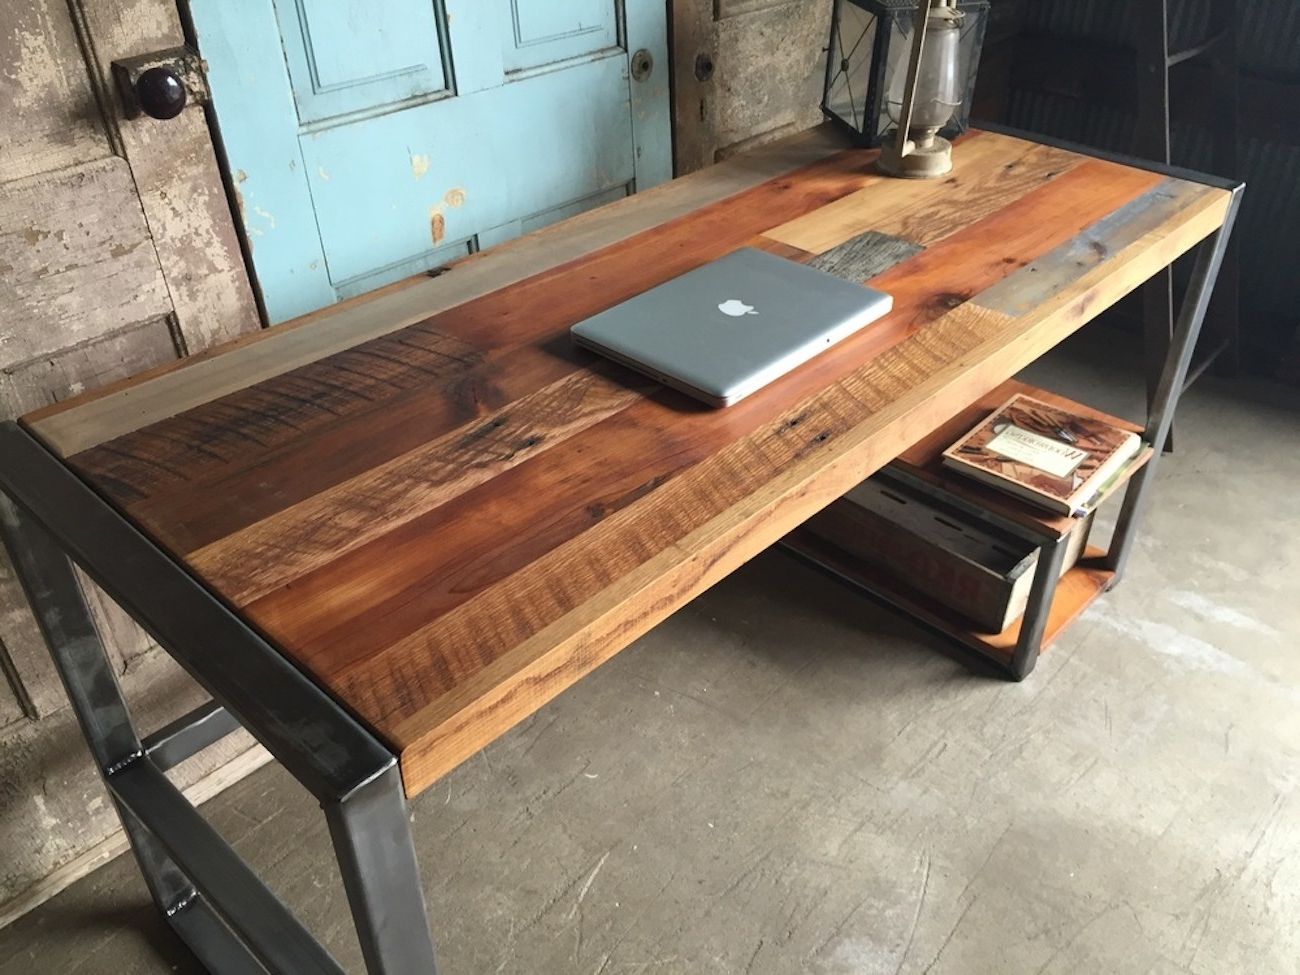 Reclaimed Wood Patchwork Desk » Gadget Flow Intended For 2019 Reclaimed Barnwood Wood Writing Desks (View 4 of 15)